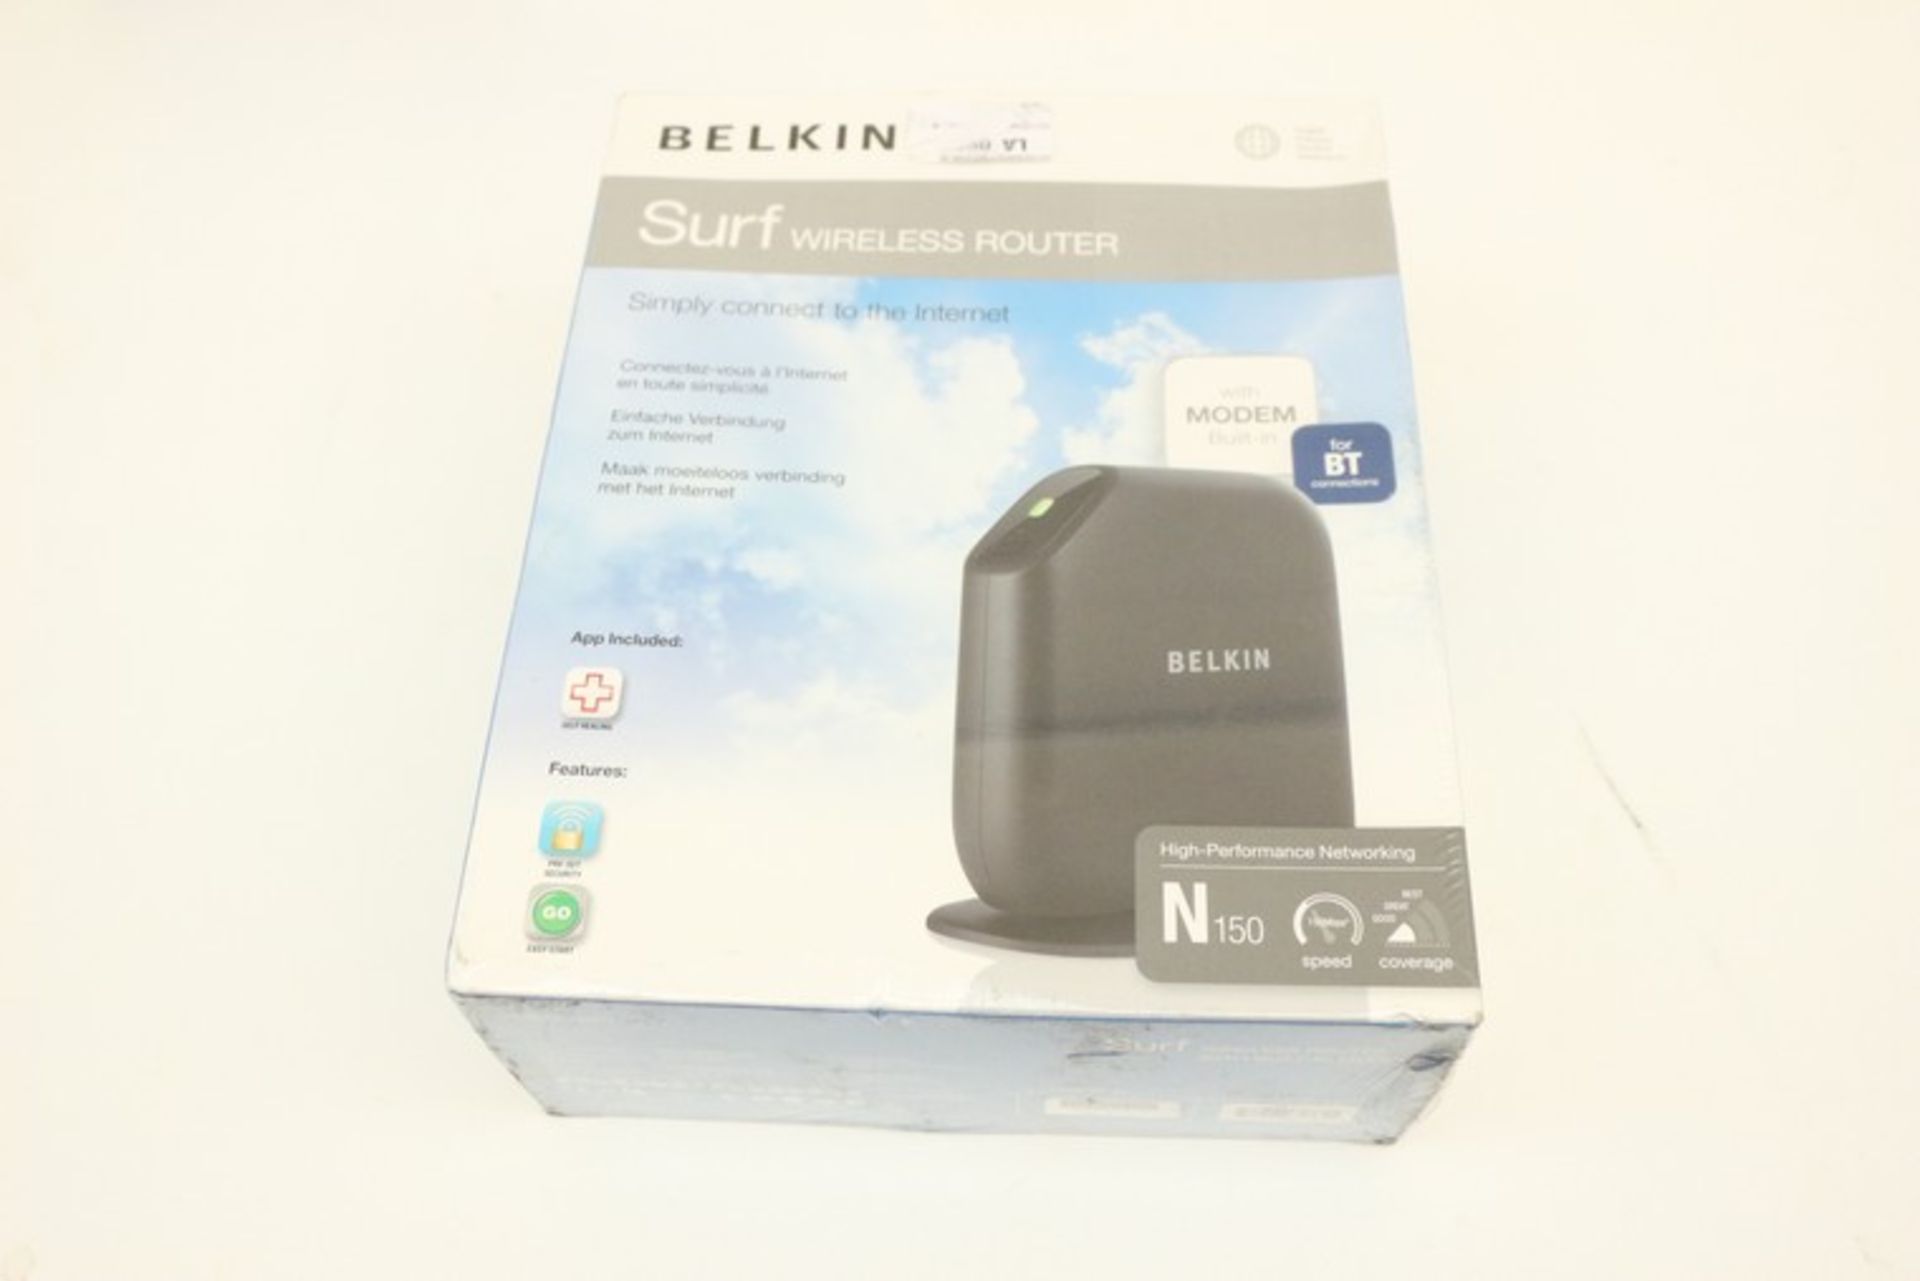 1 x BOXED BELKIN SURF WIRELESS ROUTER *PLEASE NOTE THAT THE BID PRICE IS MULTIPLIED BY THE NUMBER OF